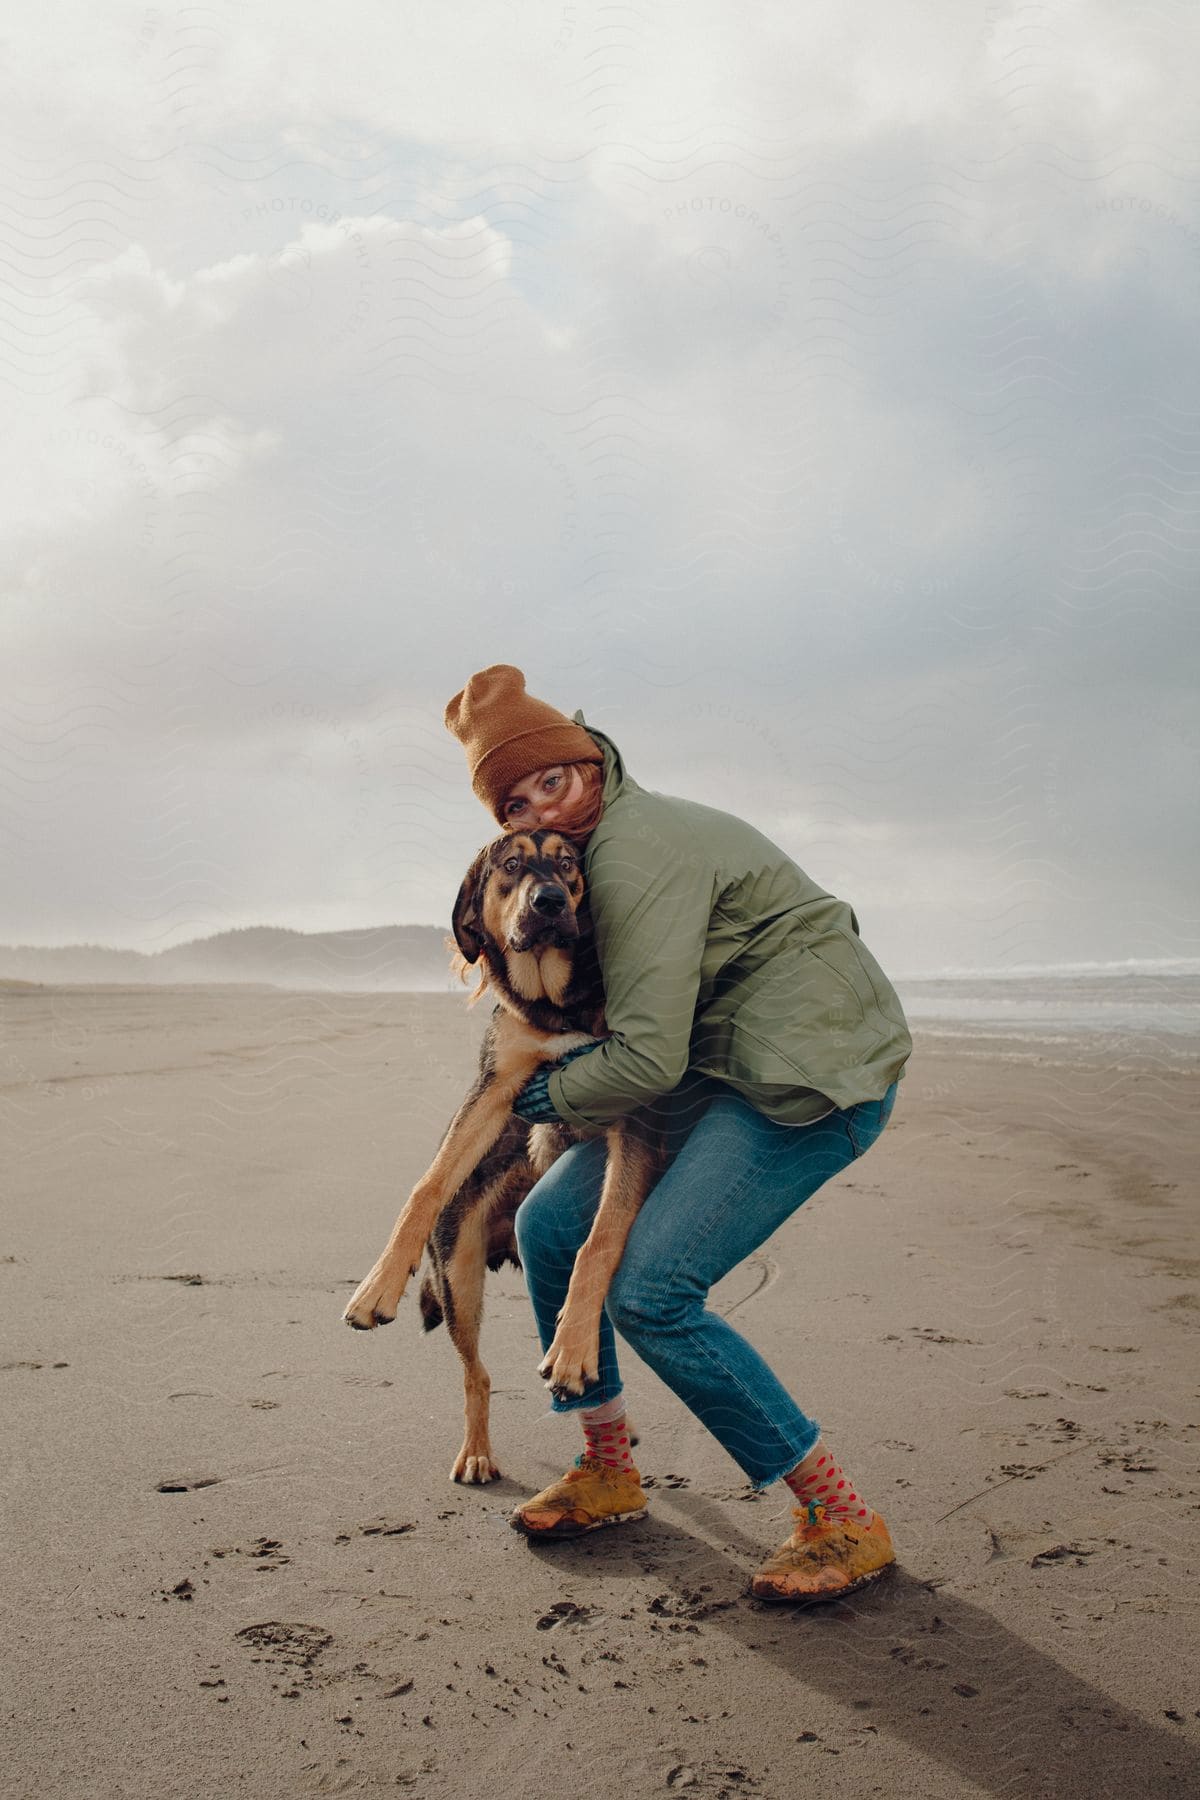 A woman with red hair wearing winter clothes hugs a dog at the beach